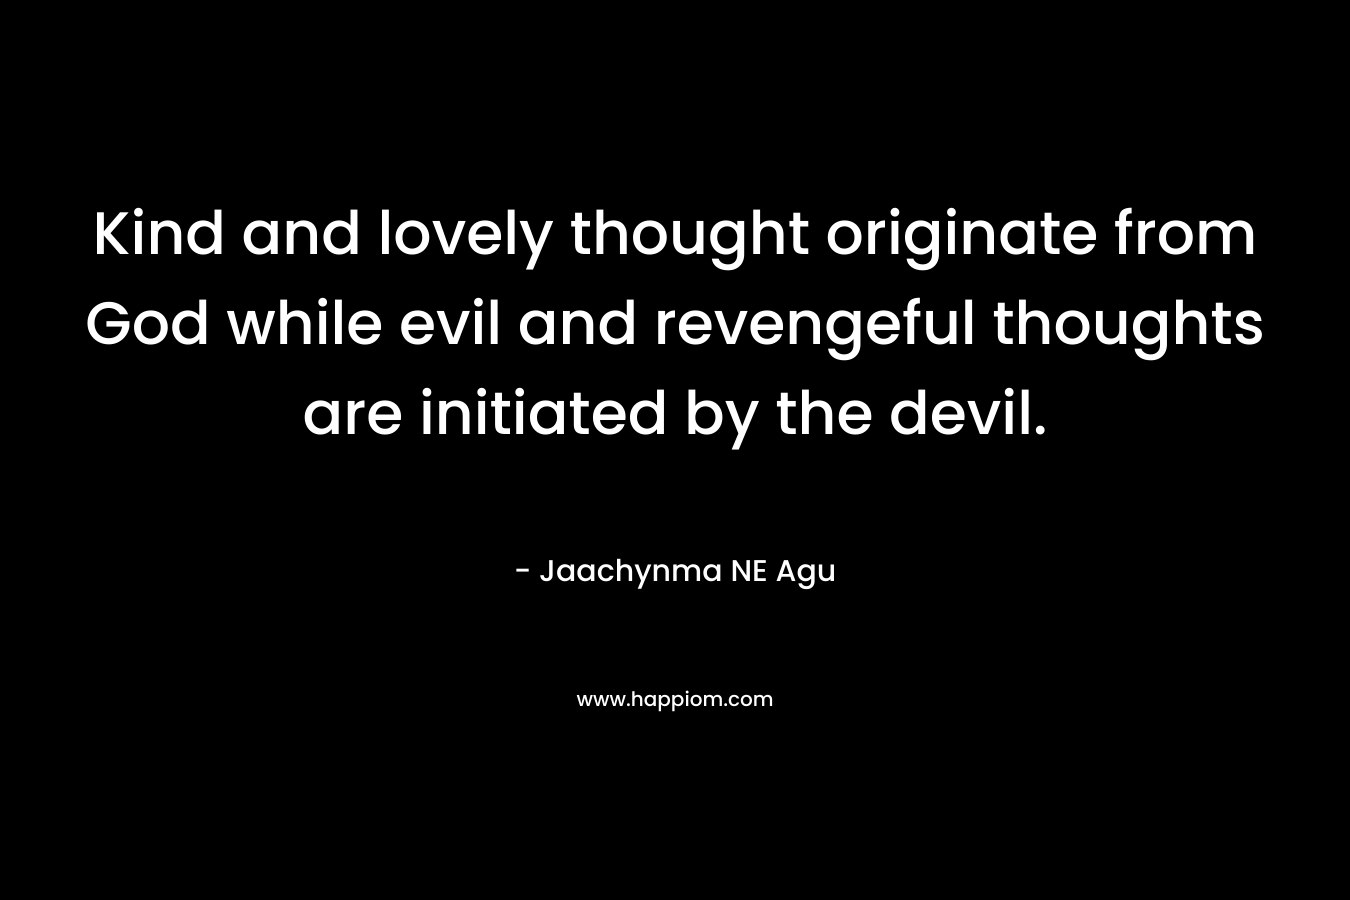 Kind and lovely thought originate from God while evil and revengeful thoughts are initiated by the devil. – Jaachynma NE Agu